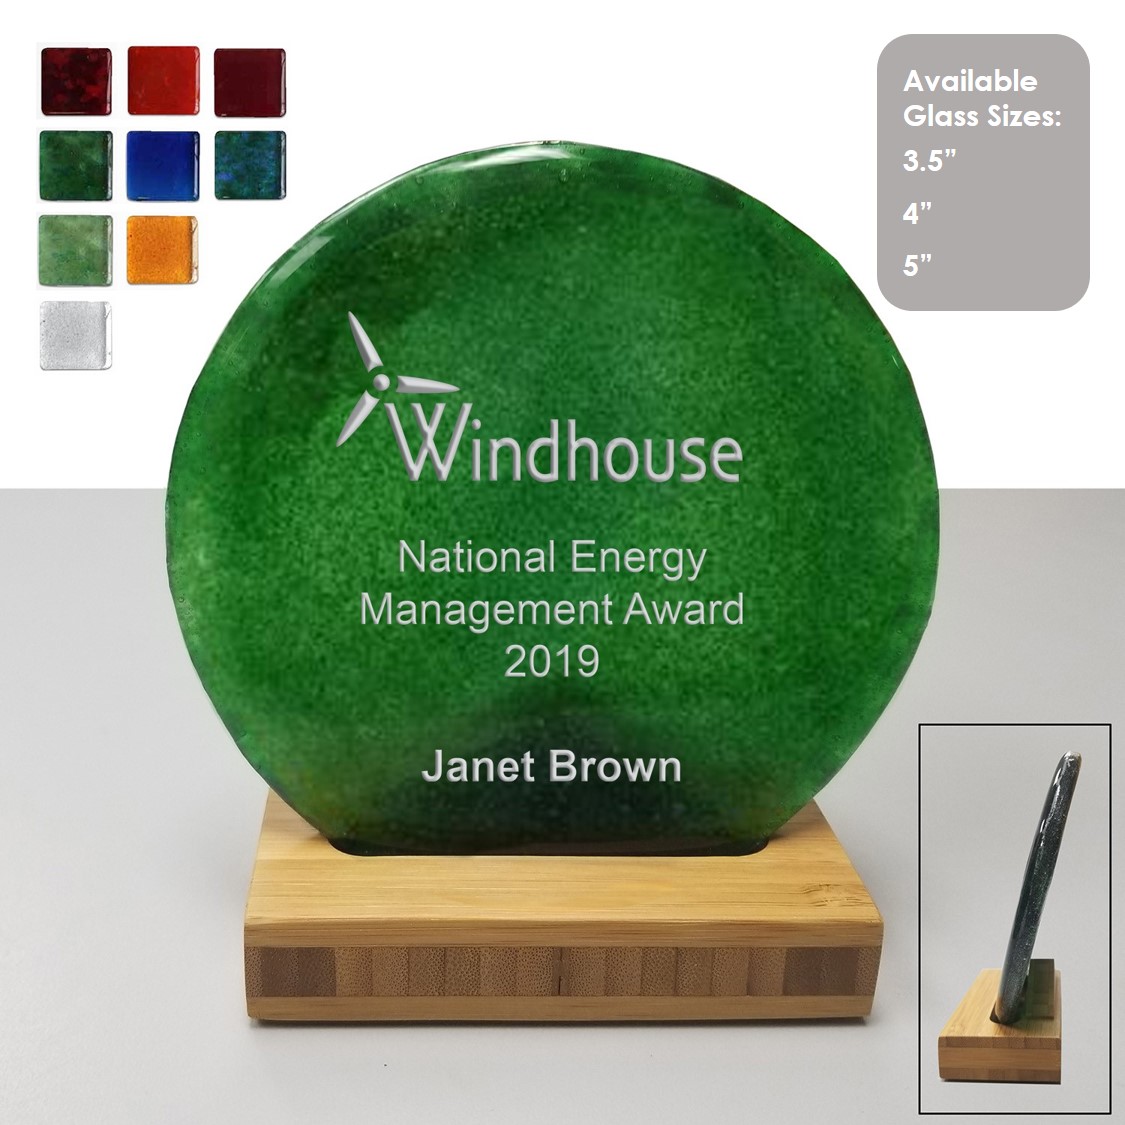 USA made round recycled glass award on bamboo stand 4"